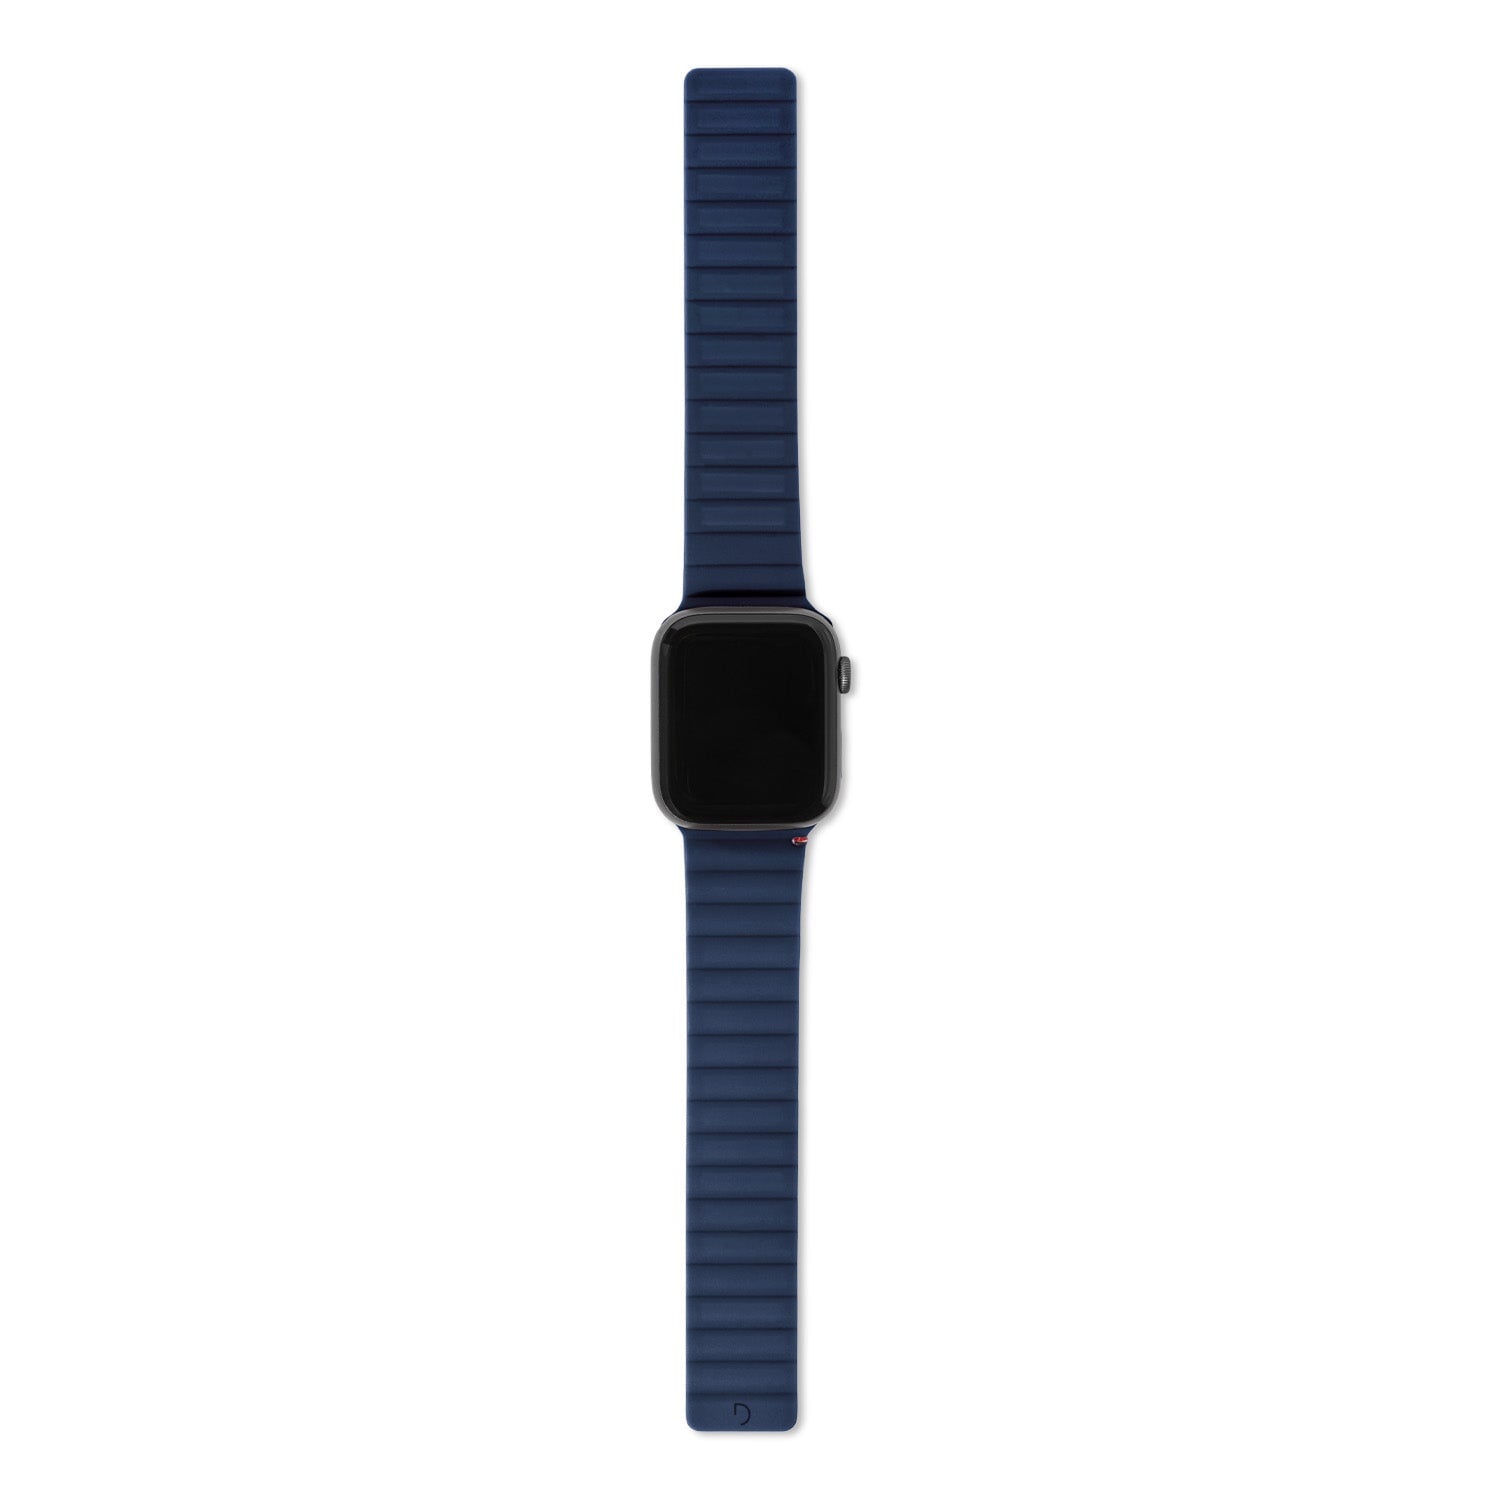 Silicone Magnetic Traction Strap Lite Apple Watch 44mm, Matte Navy